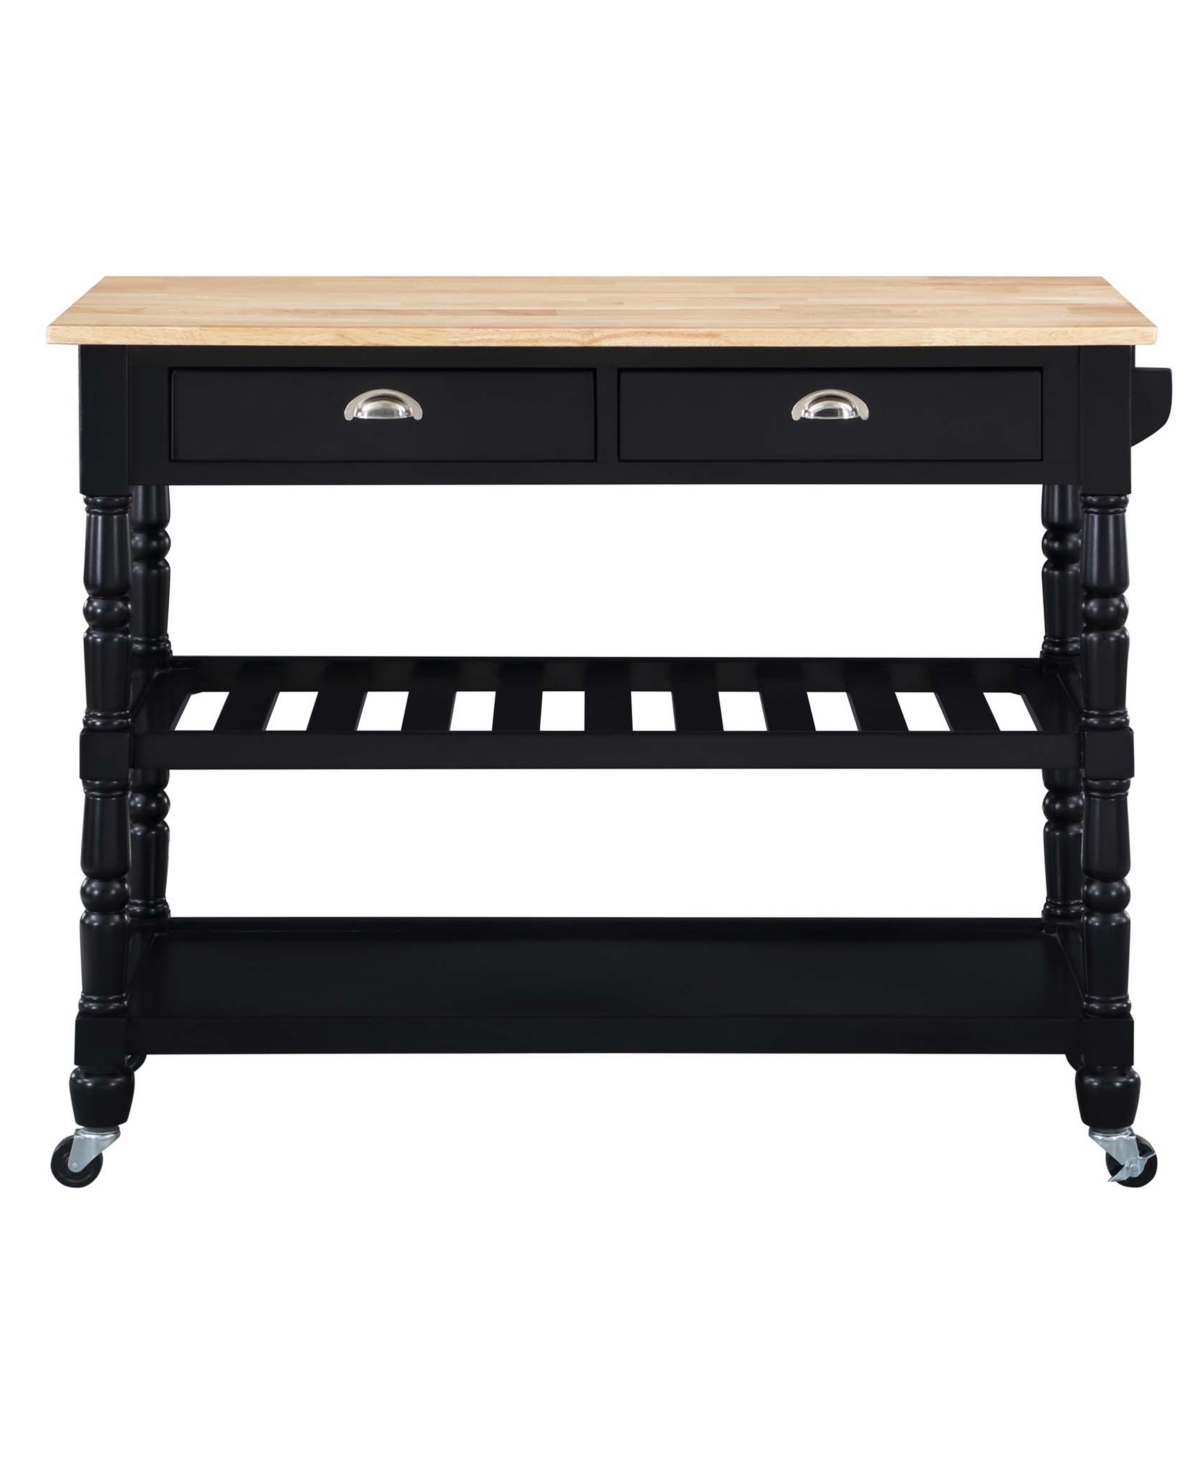 Convenience Concepts French Country 45" Wood 3 Tier Butcher Block Kitchen Cart In Black,butcher Block